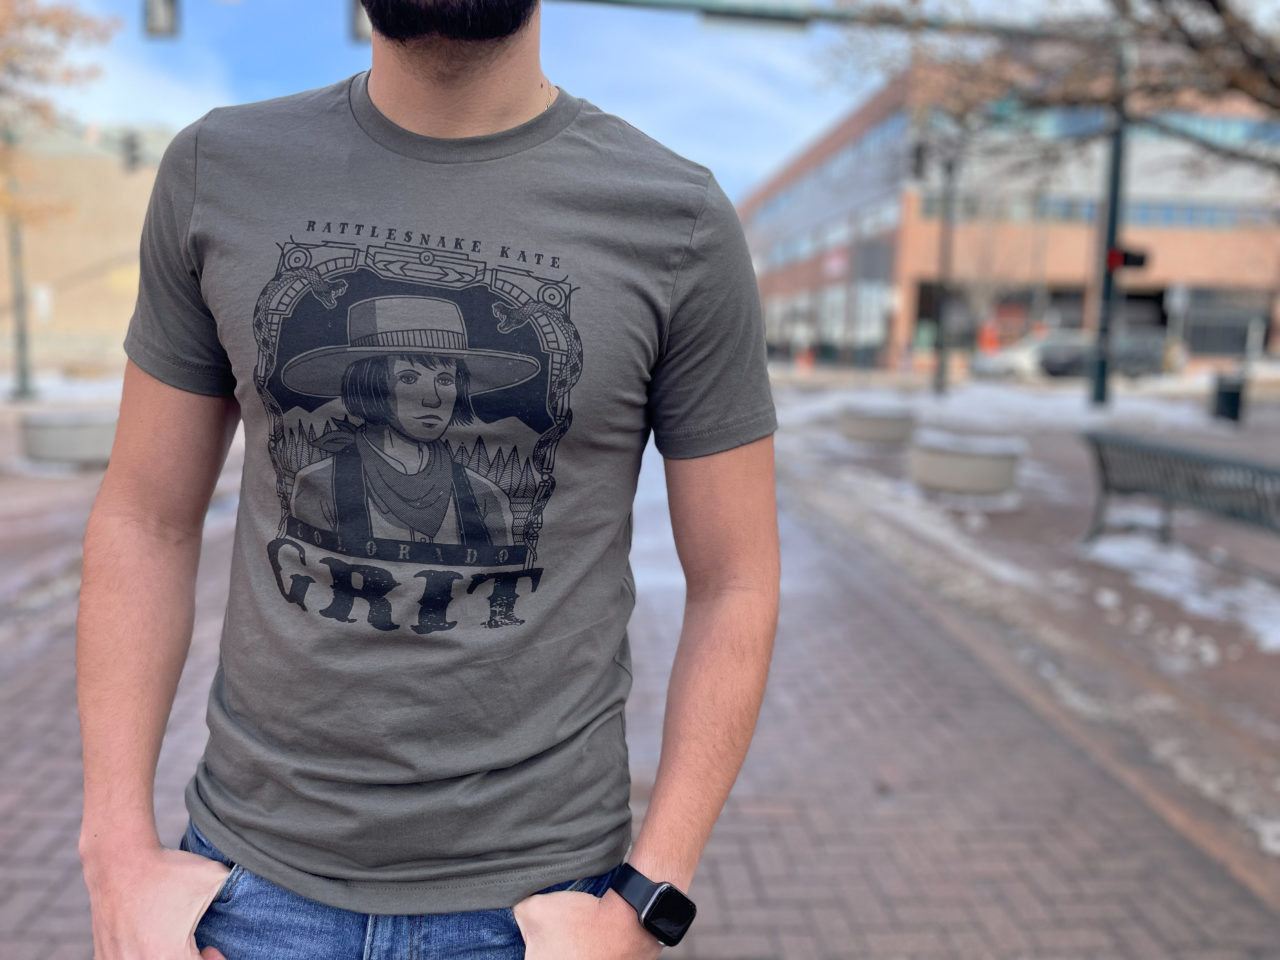 City of Greeley Museums’ Limited Rattlesnake Kate T-shirt